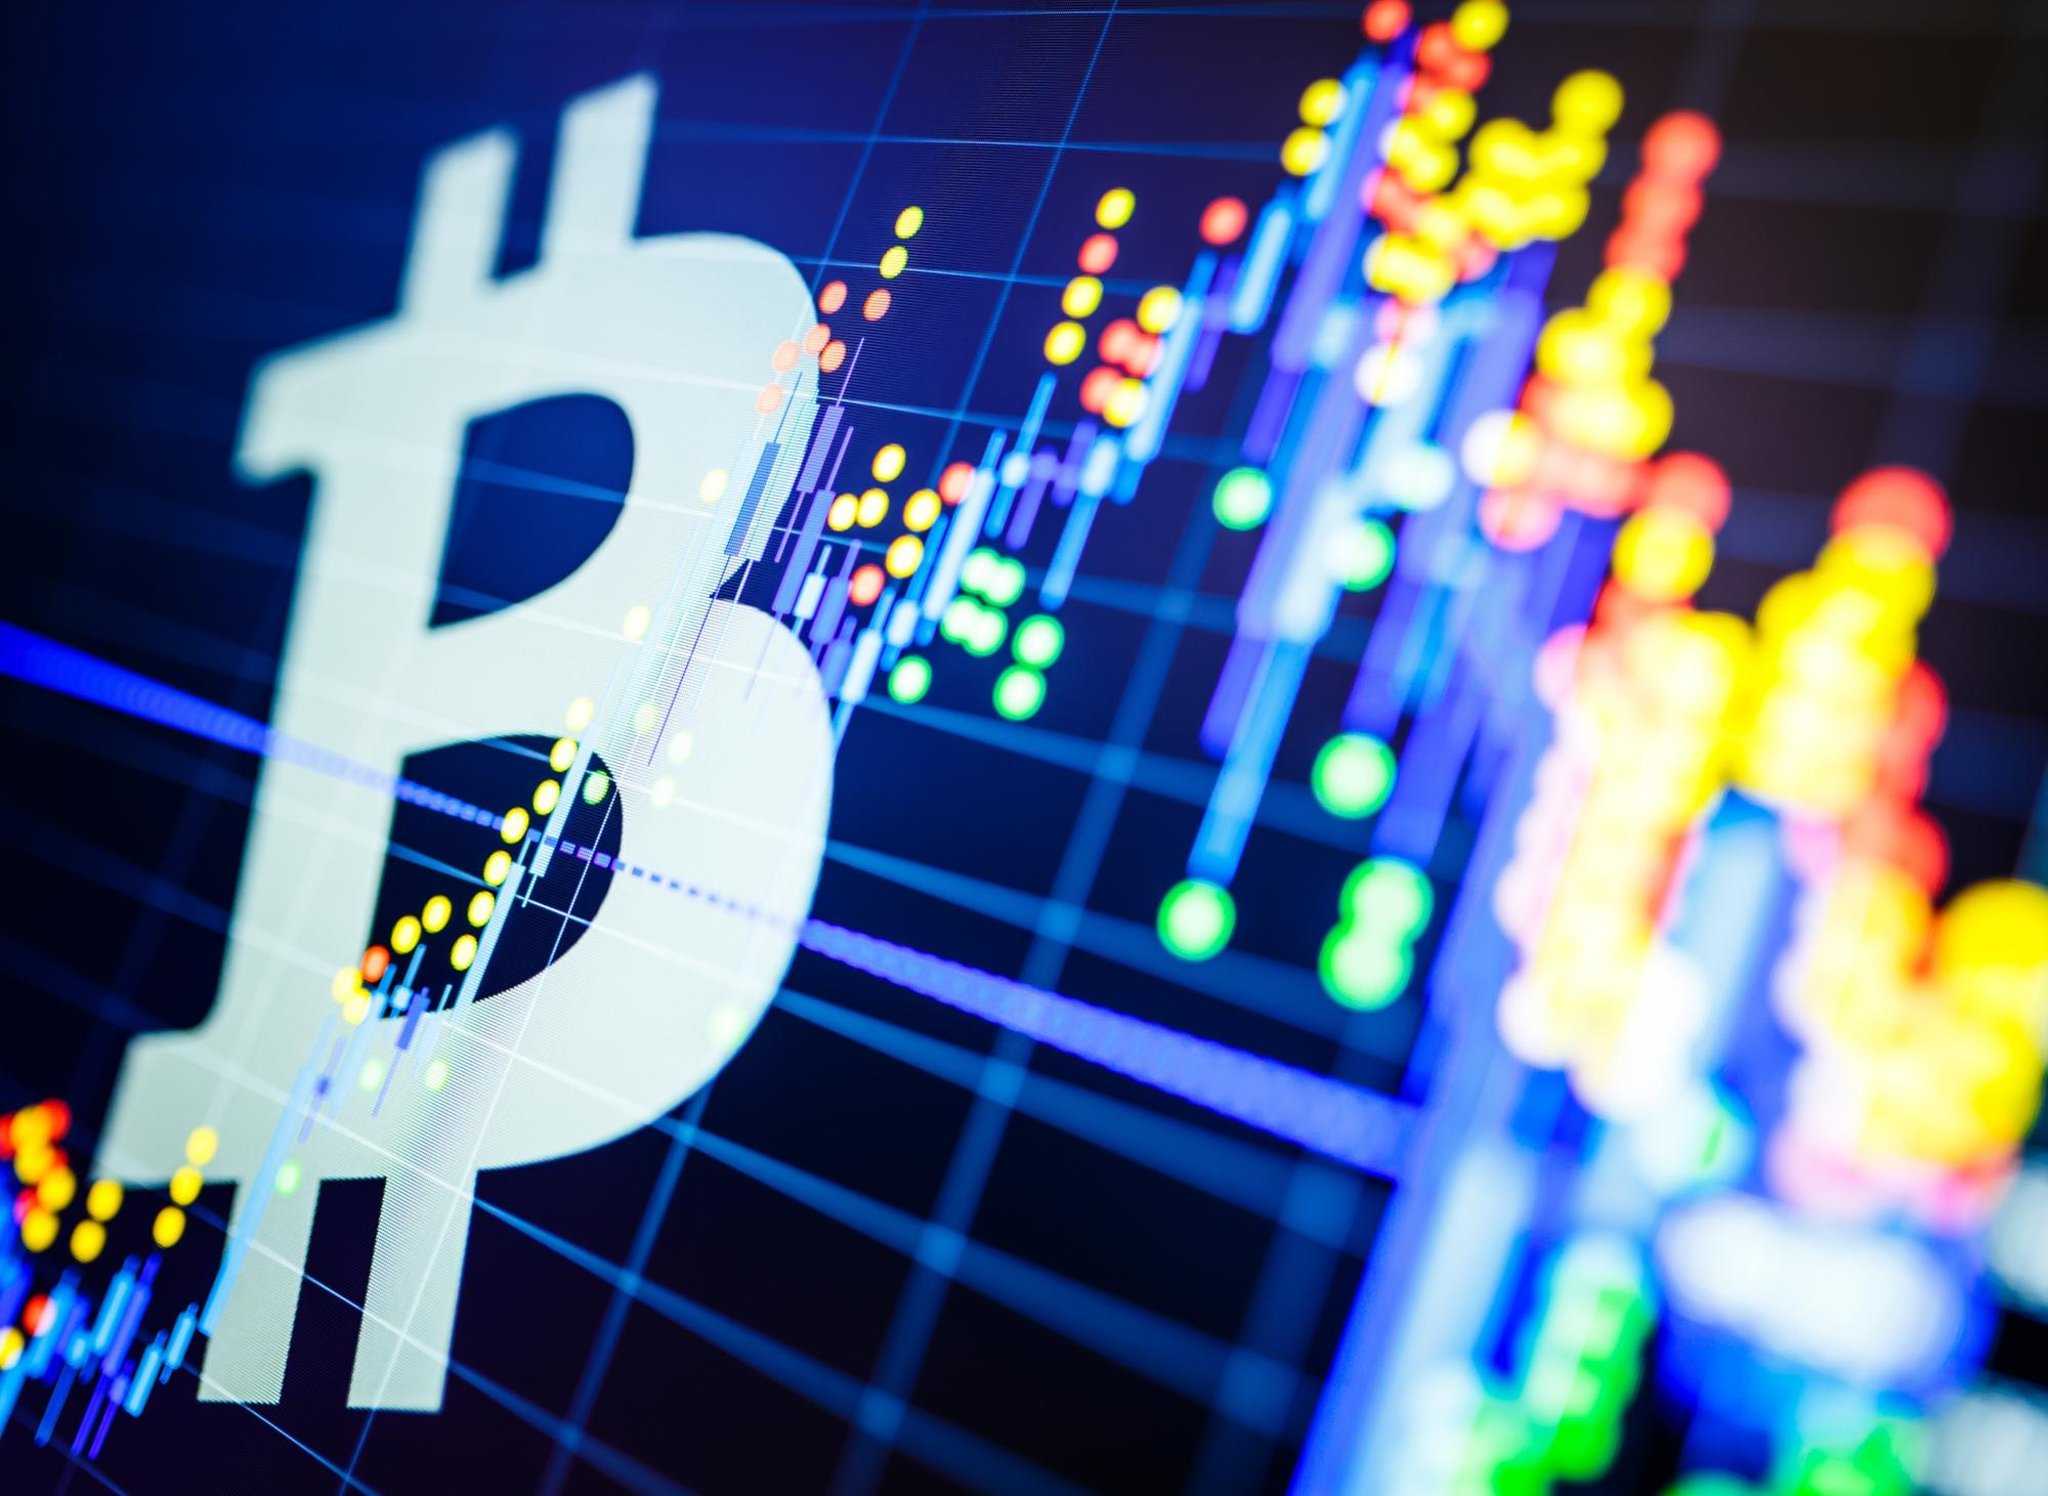 Bitcoin price drops in fresh China crypto crackdown along with  cryptocurrency prices of Ethereum, XRP, Cardano | The Scotsman